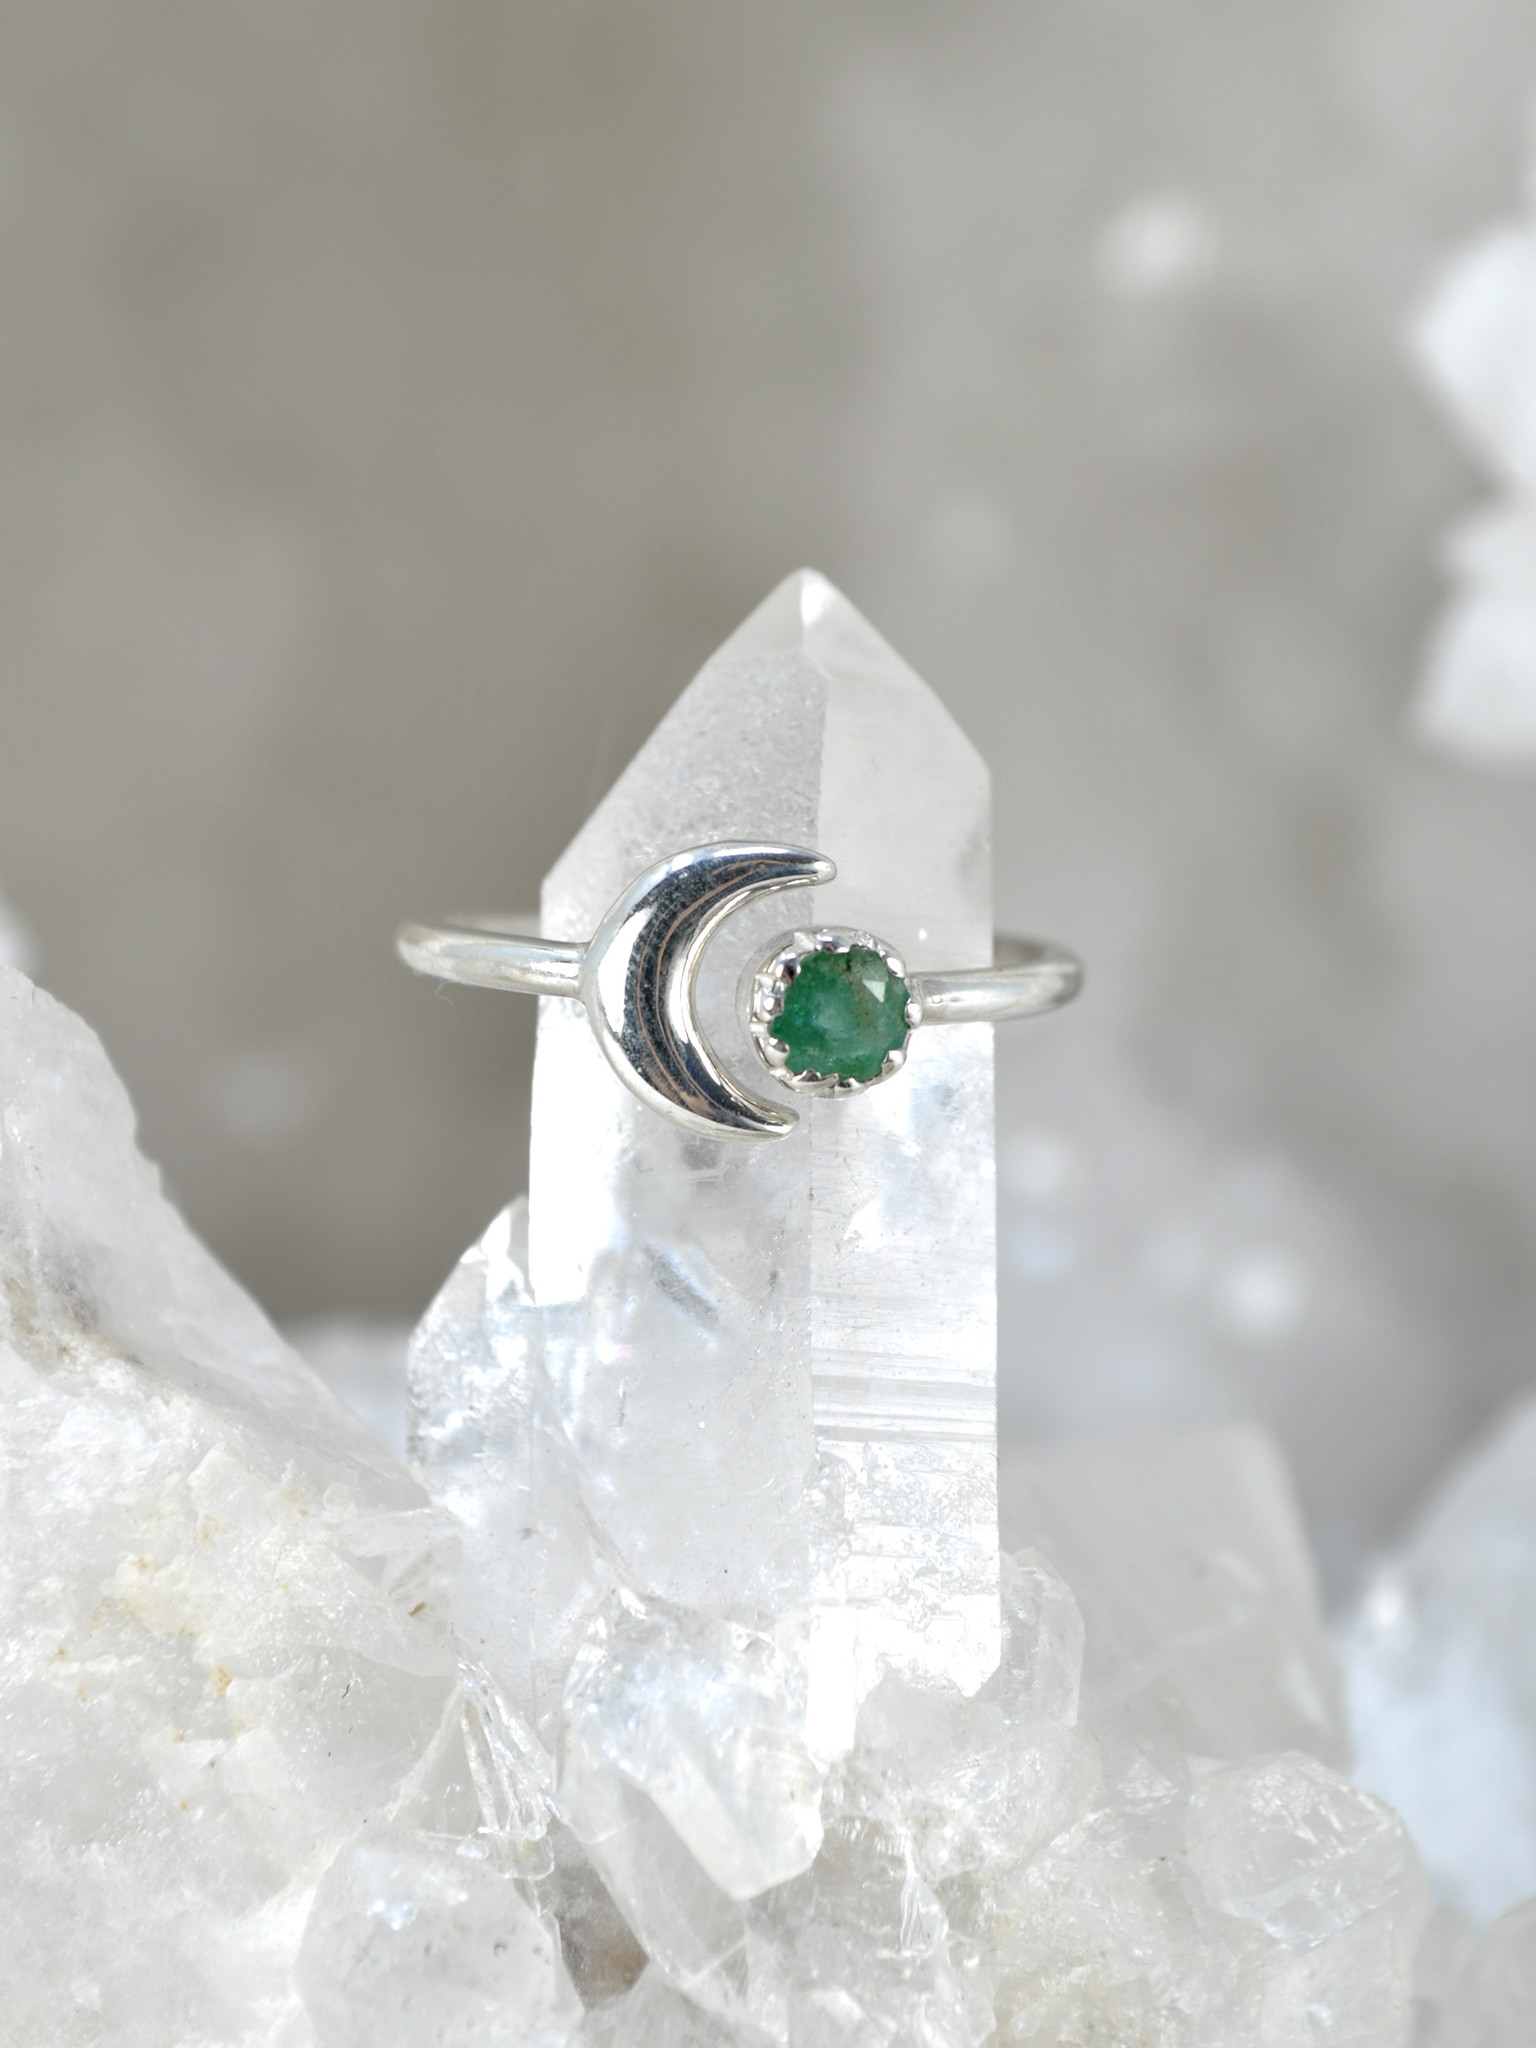 6.25 Ratti Natural Panna Stone Silver Plated Ring Natural Emerald Stone And  Lab Certified Men Women